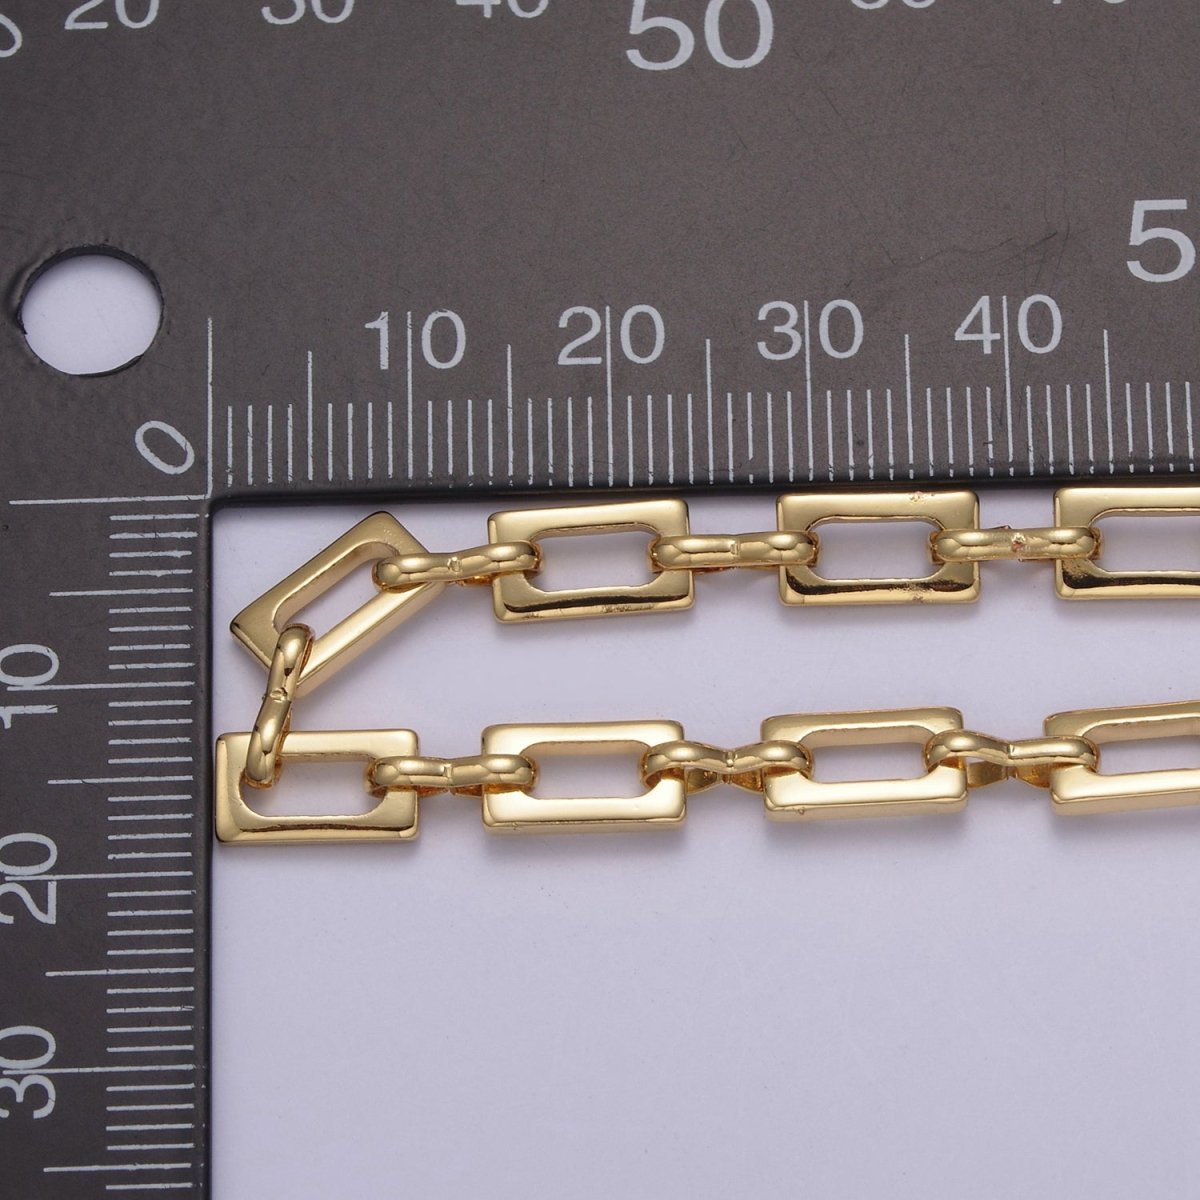 24K Gold Filled Unique Unfinished Chain For Jewelry Making, 9.8X5.5mm Width Rectangle Paper Clip Chain with 3.3mm Figure Eight Link | ROLL-647 Clearance Pricing - DLUXCA